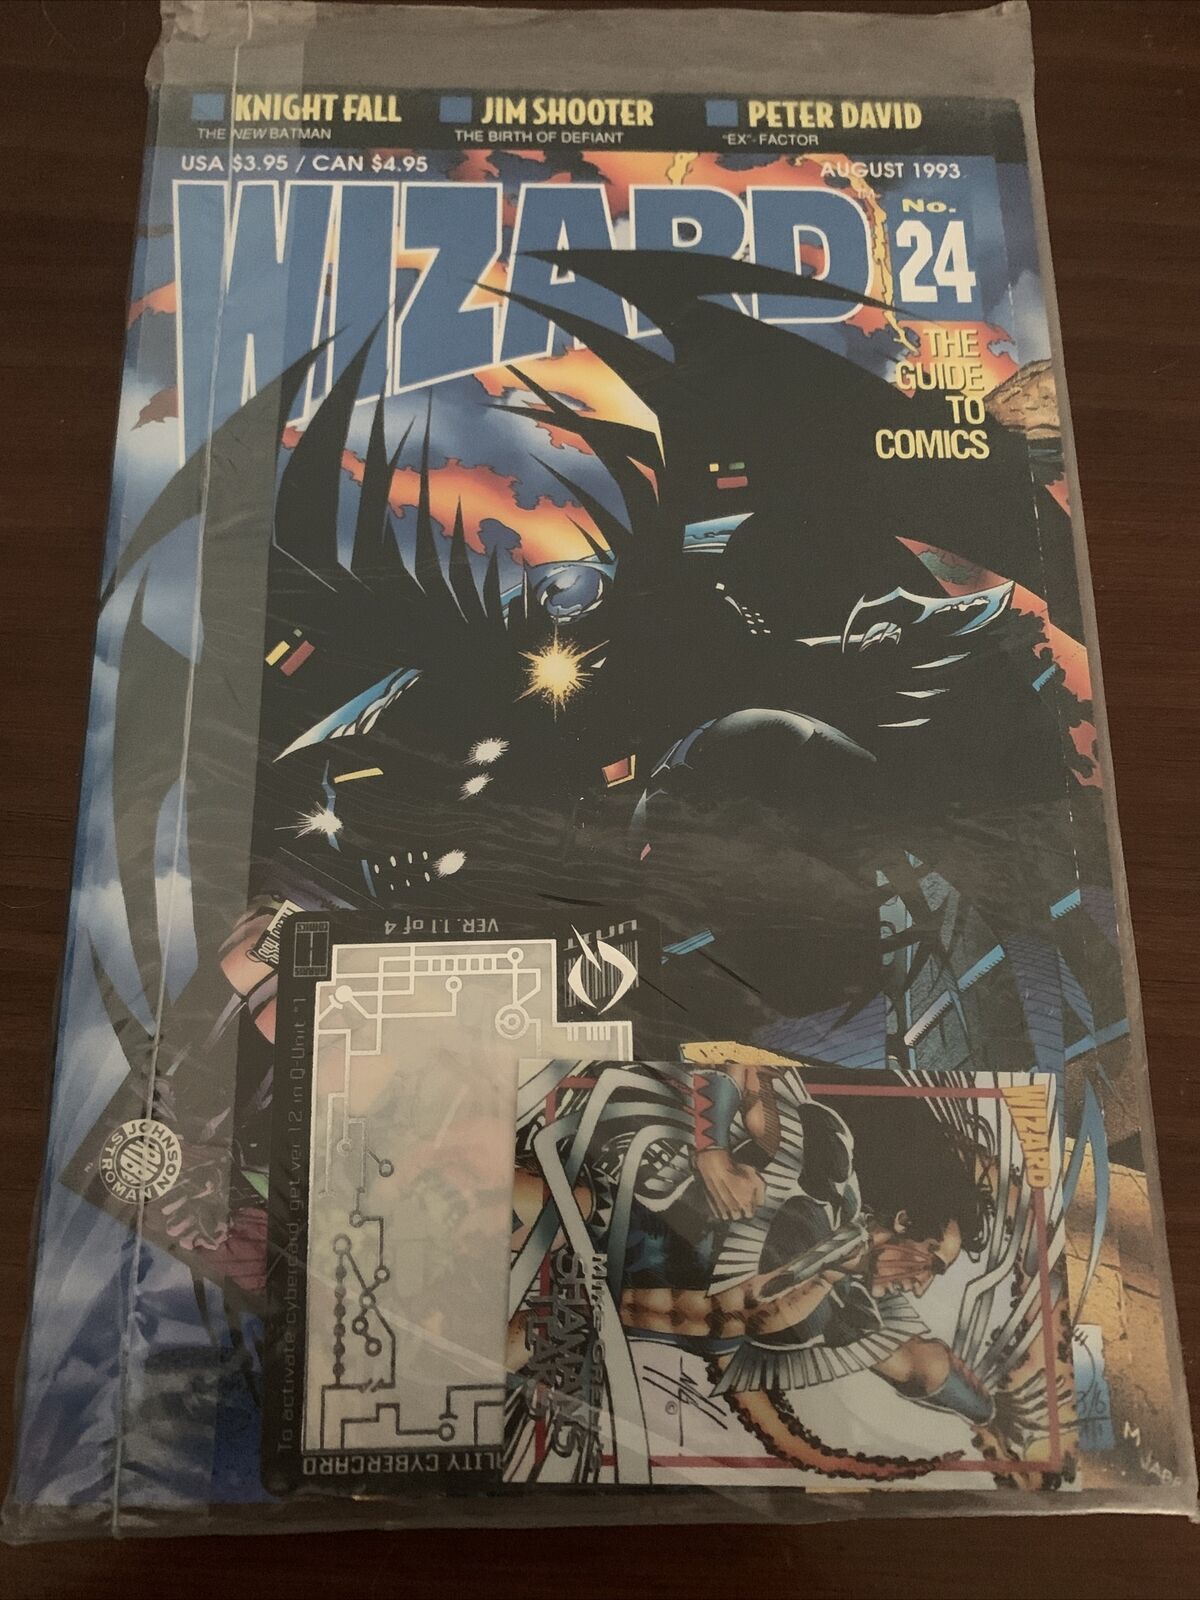 Wizard: The Guide To Comics #24 (August 1993, VF/NM) COMBINE SHIPPING